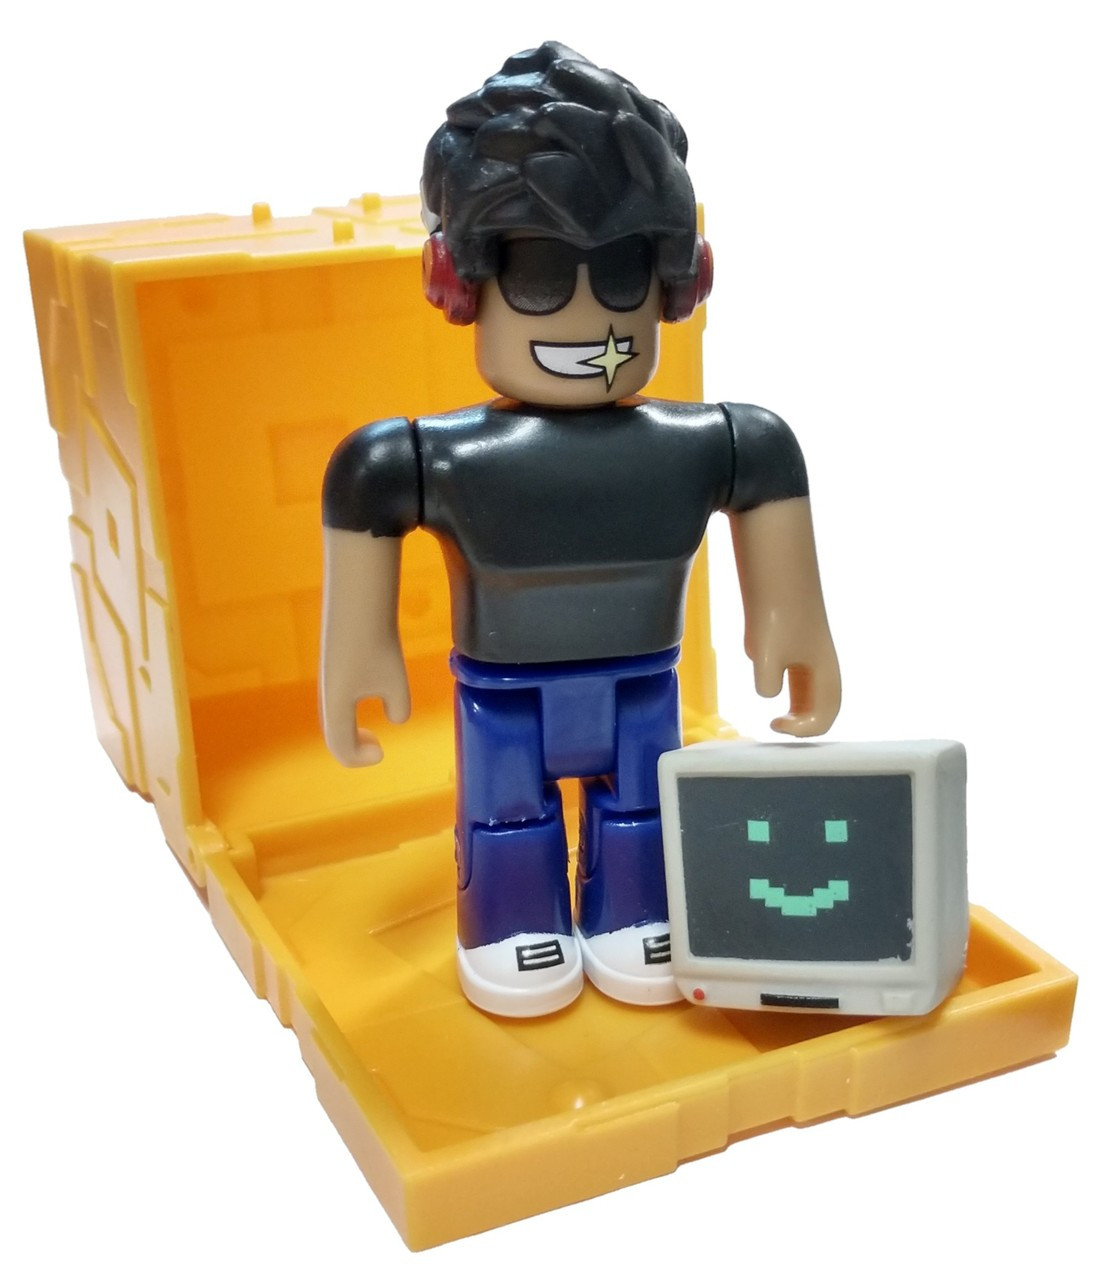 Roblox Series 5 Simbuilder 3 Mini Figure With Gold Cube And Online Code Loose Jazwares Toywiz - roblox series 6 4sci 3 mini figure with orange cube and online code loose jazwares toywiz